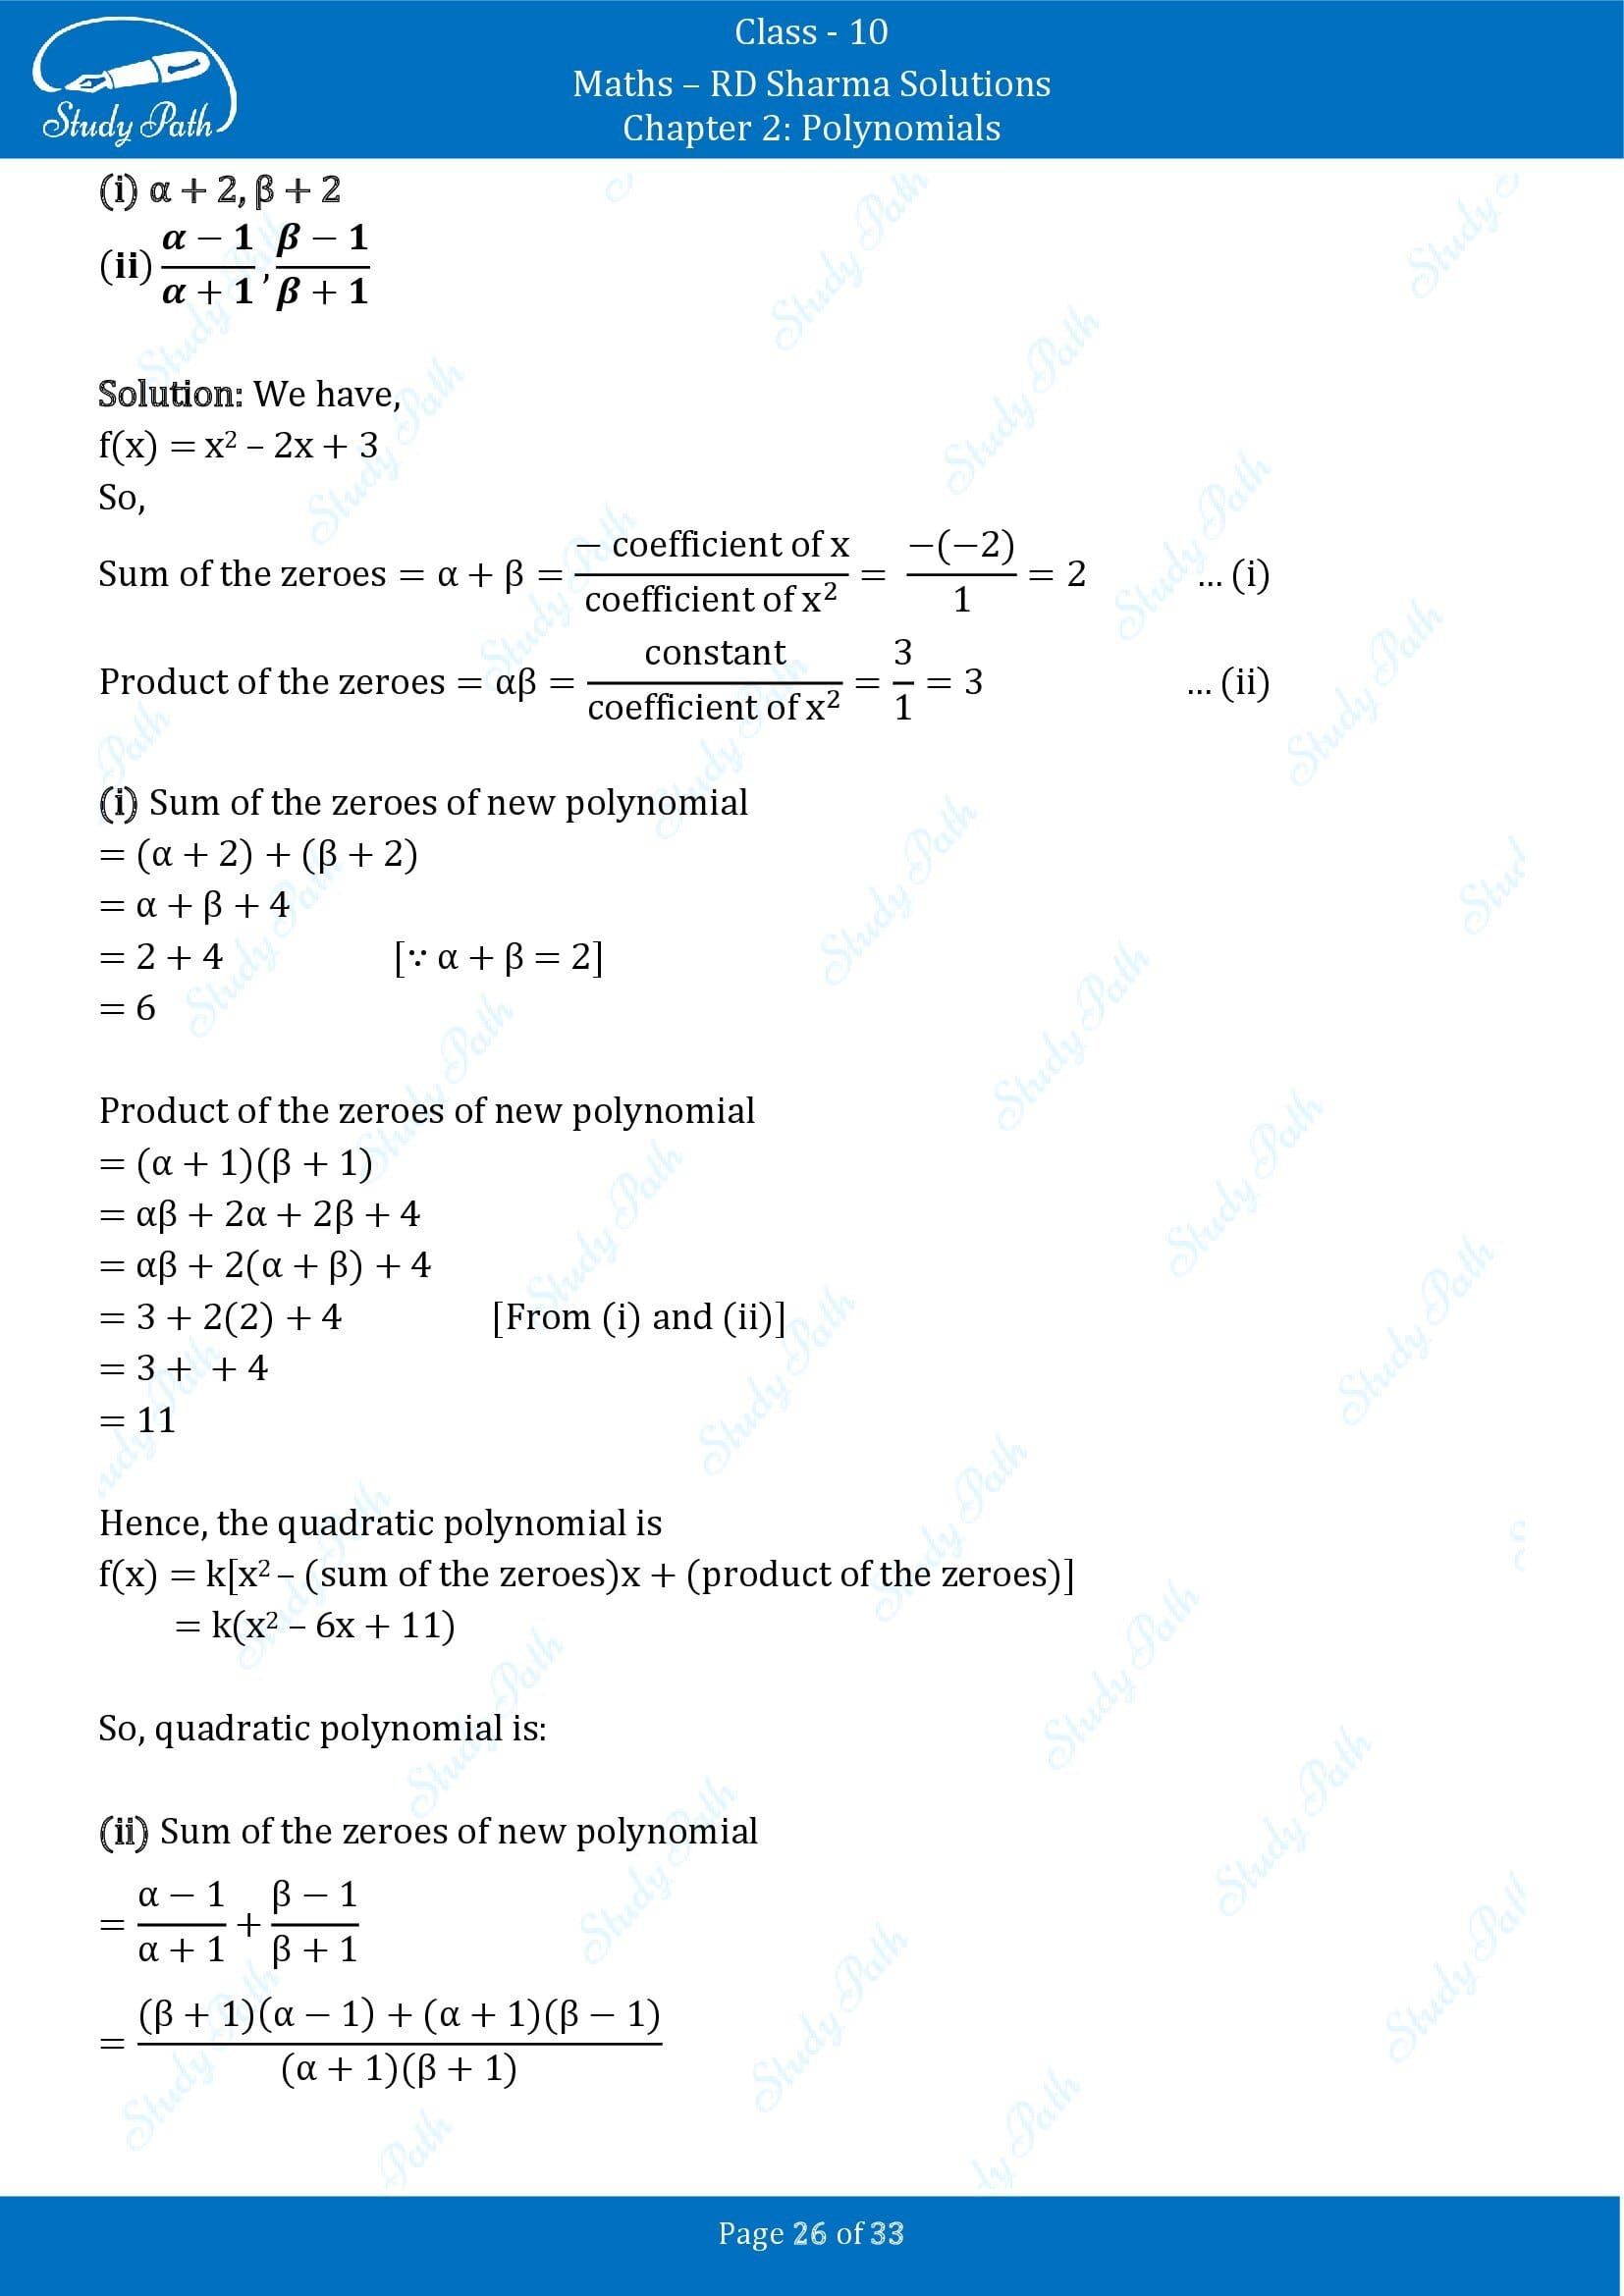 RD Sharma Solutions Class 10 Chapter 2 Polynomials Exercise 2.1 00026